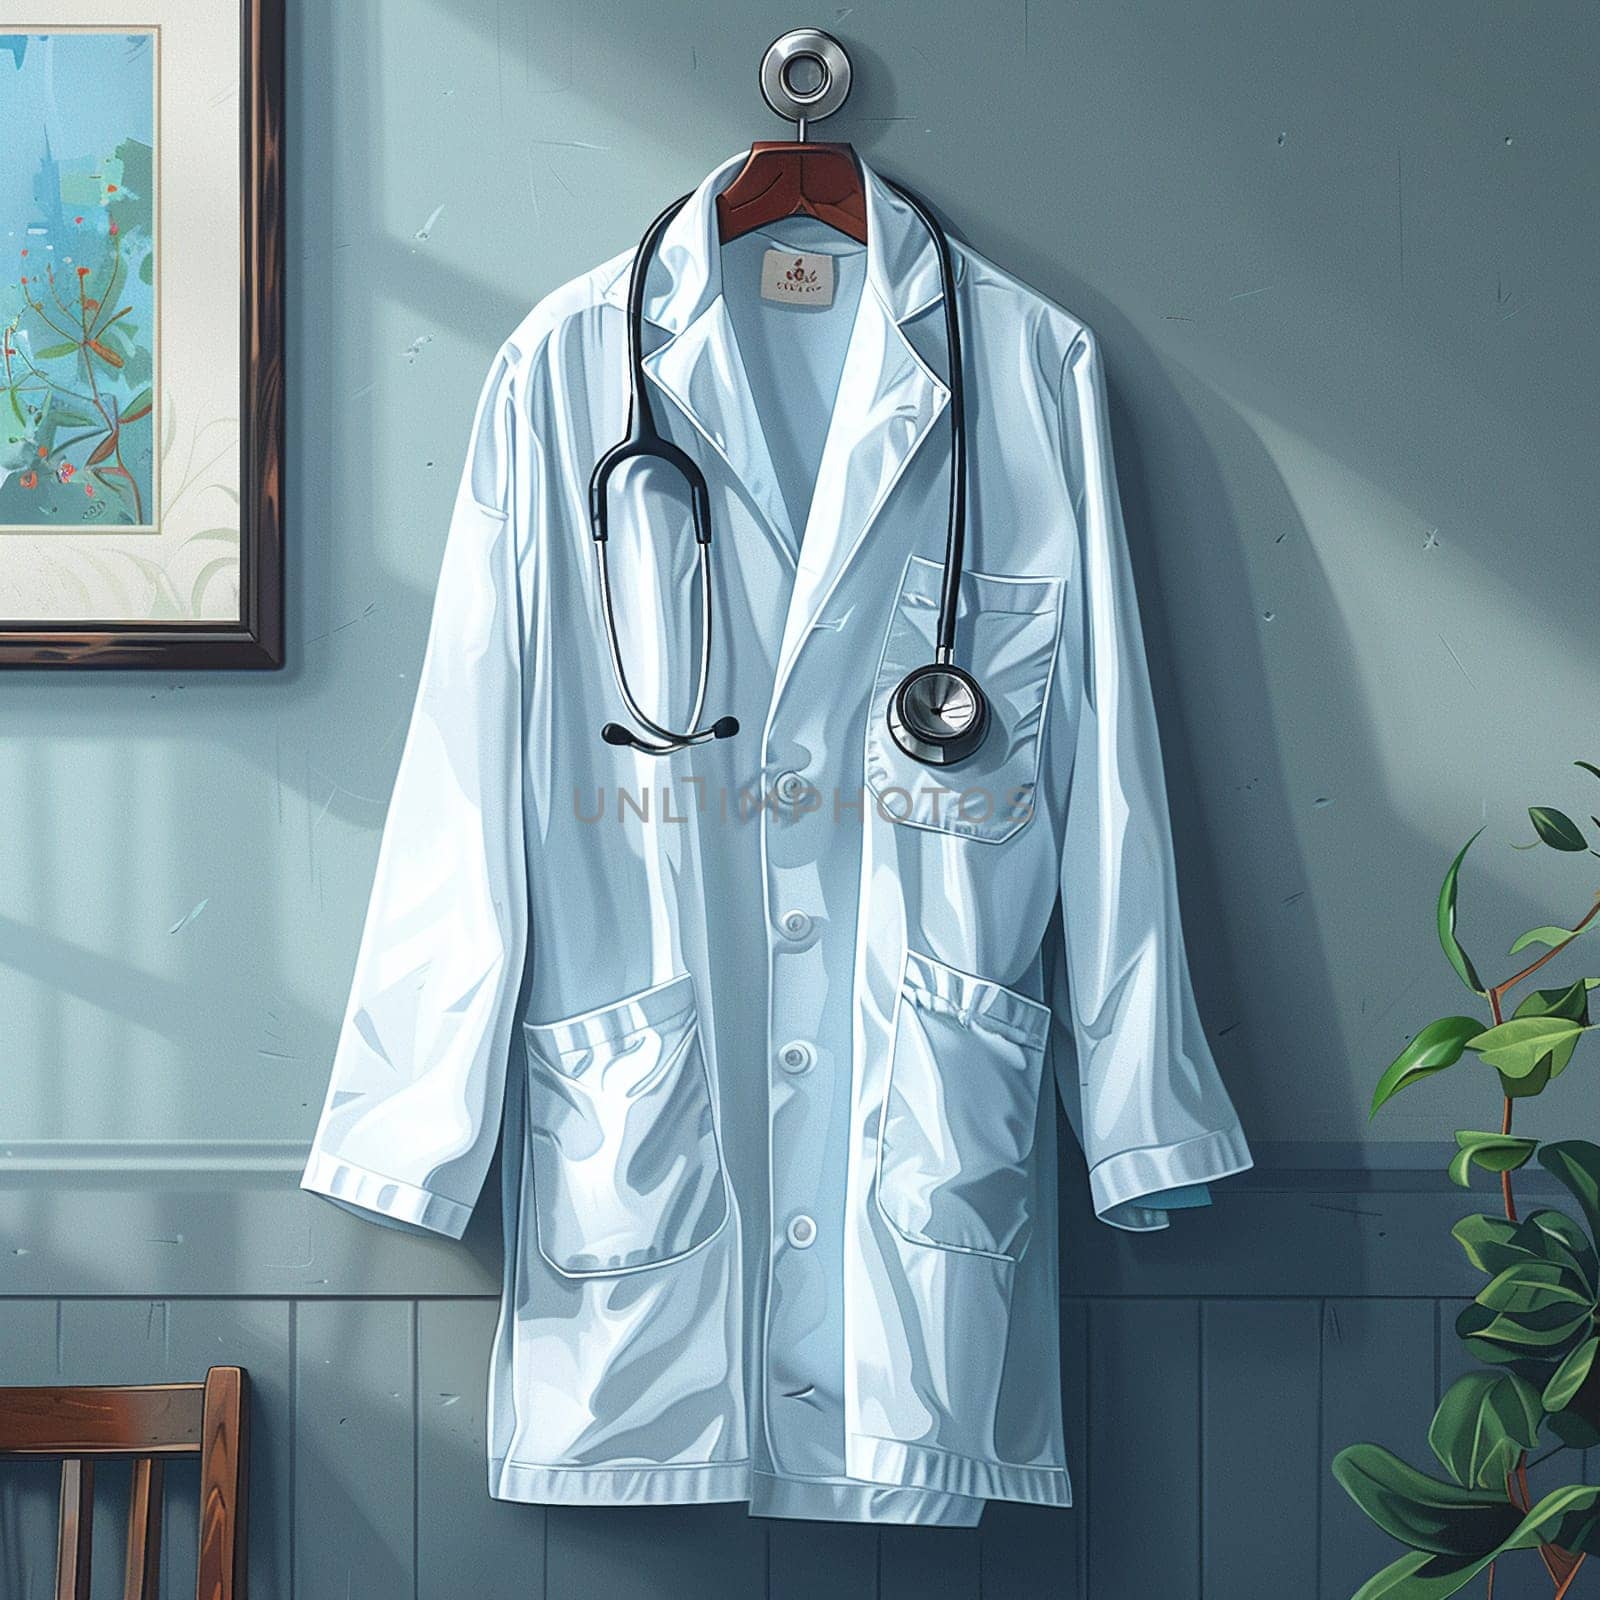 Illustration of stethoscope and white coat hanging on wall for National Doctors Day.